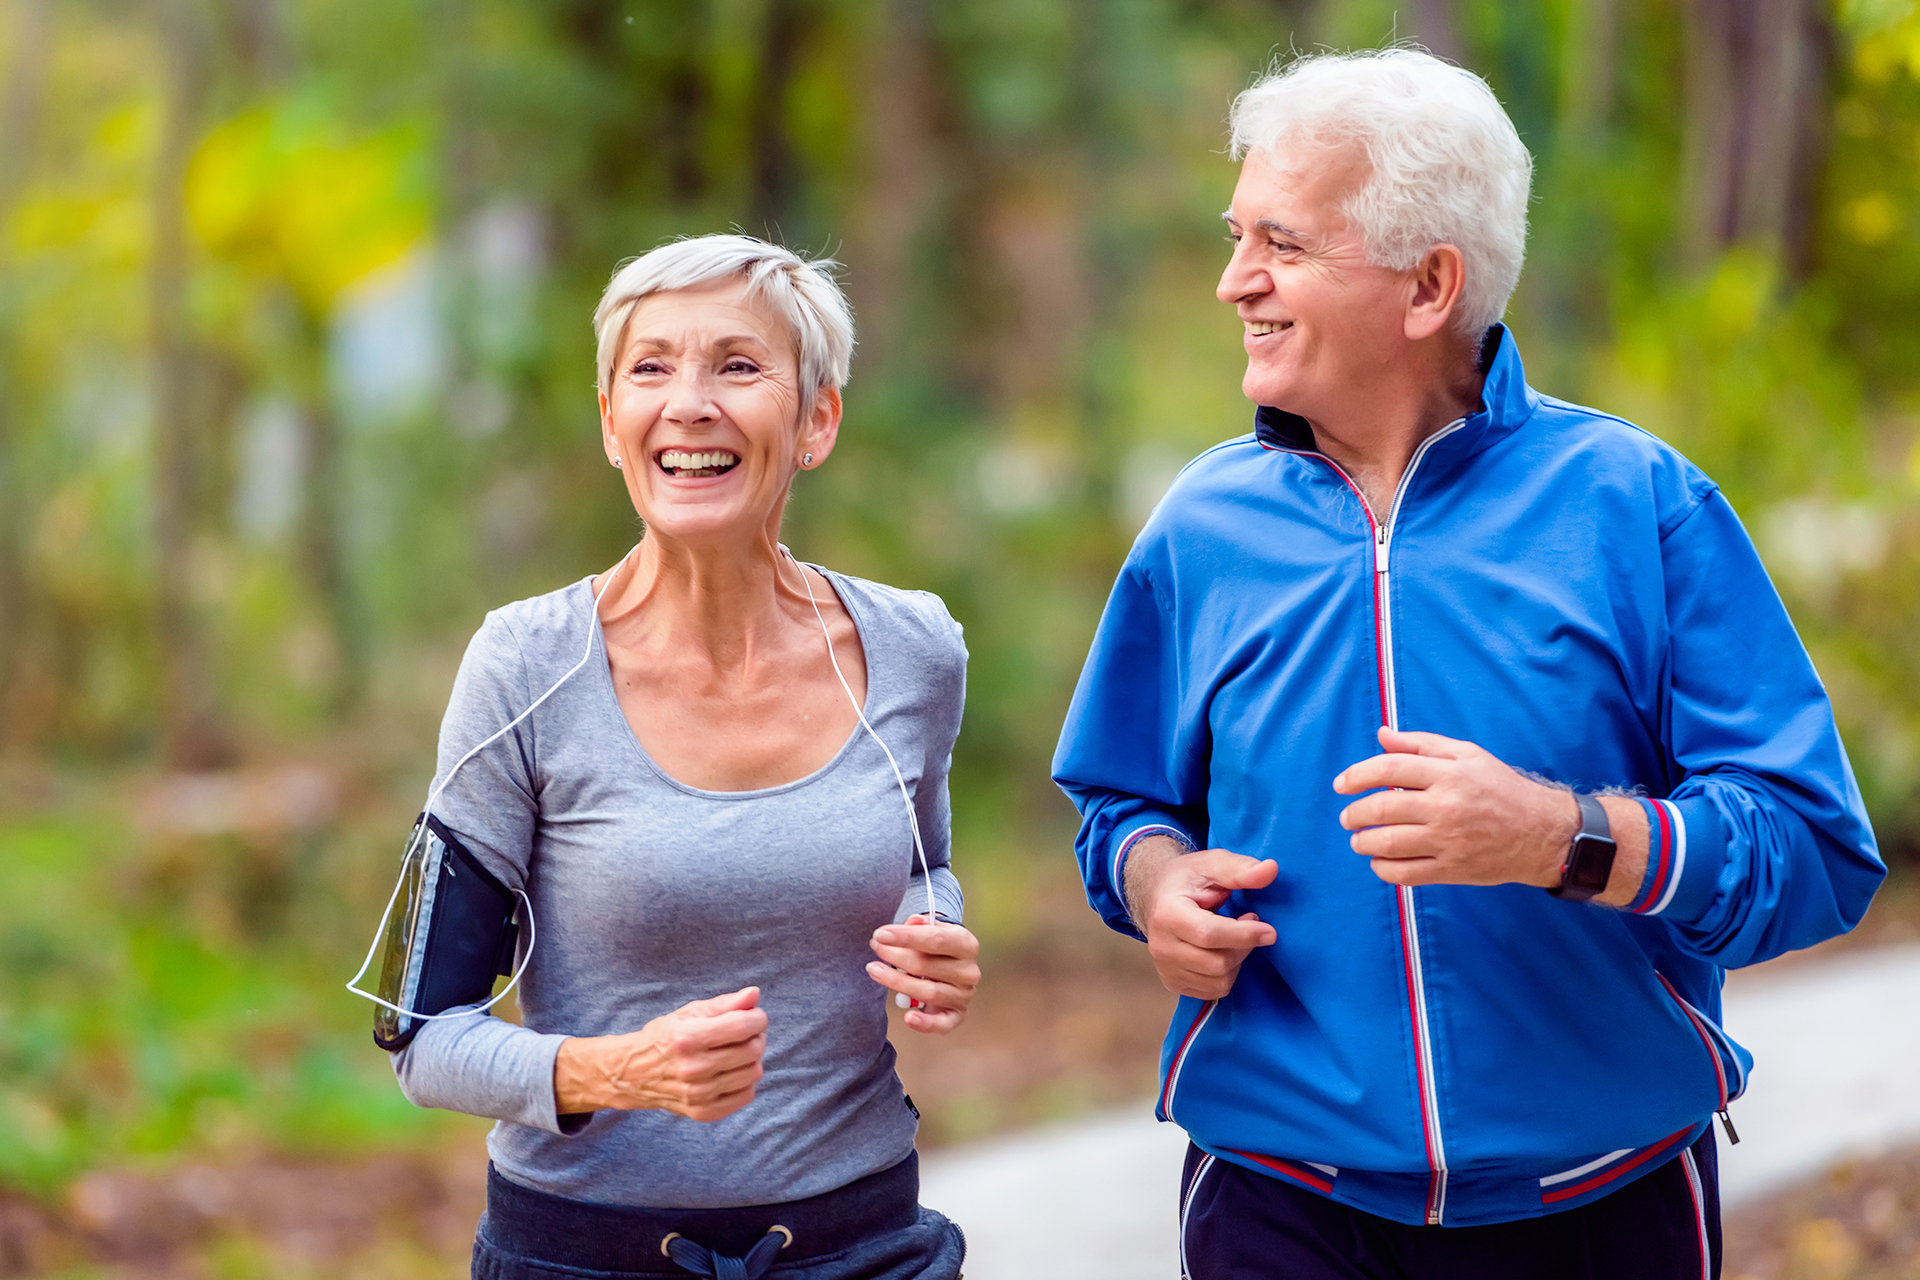 elderly couple smiling and jogging outside.